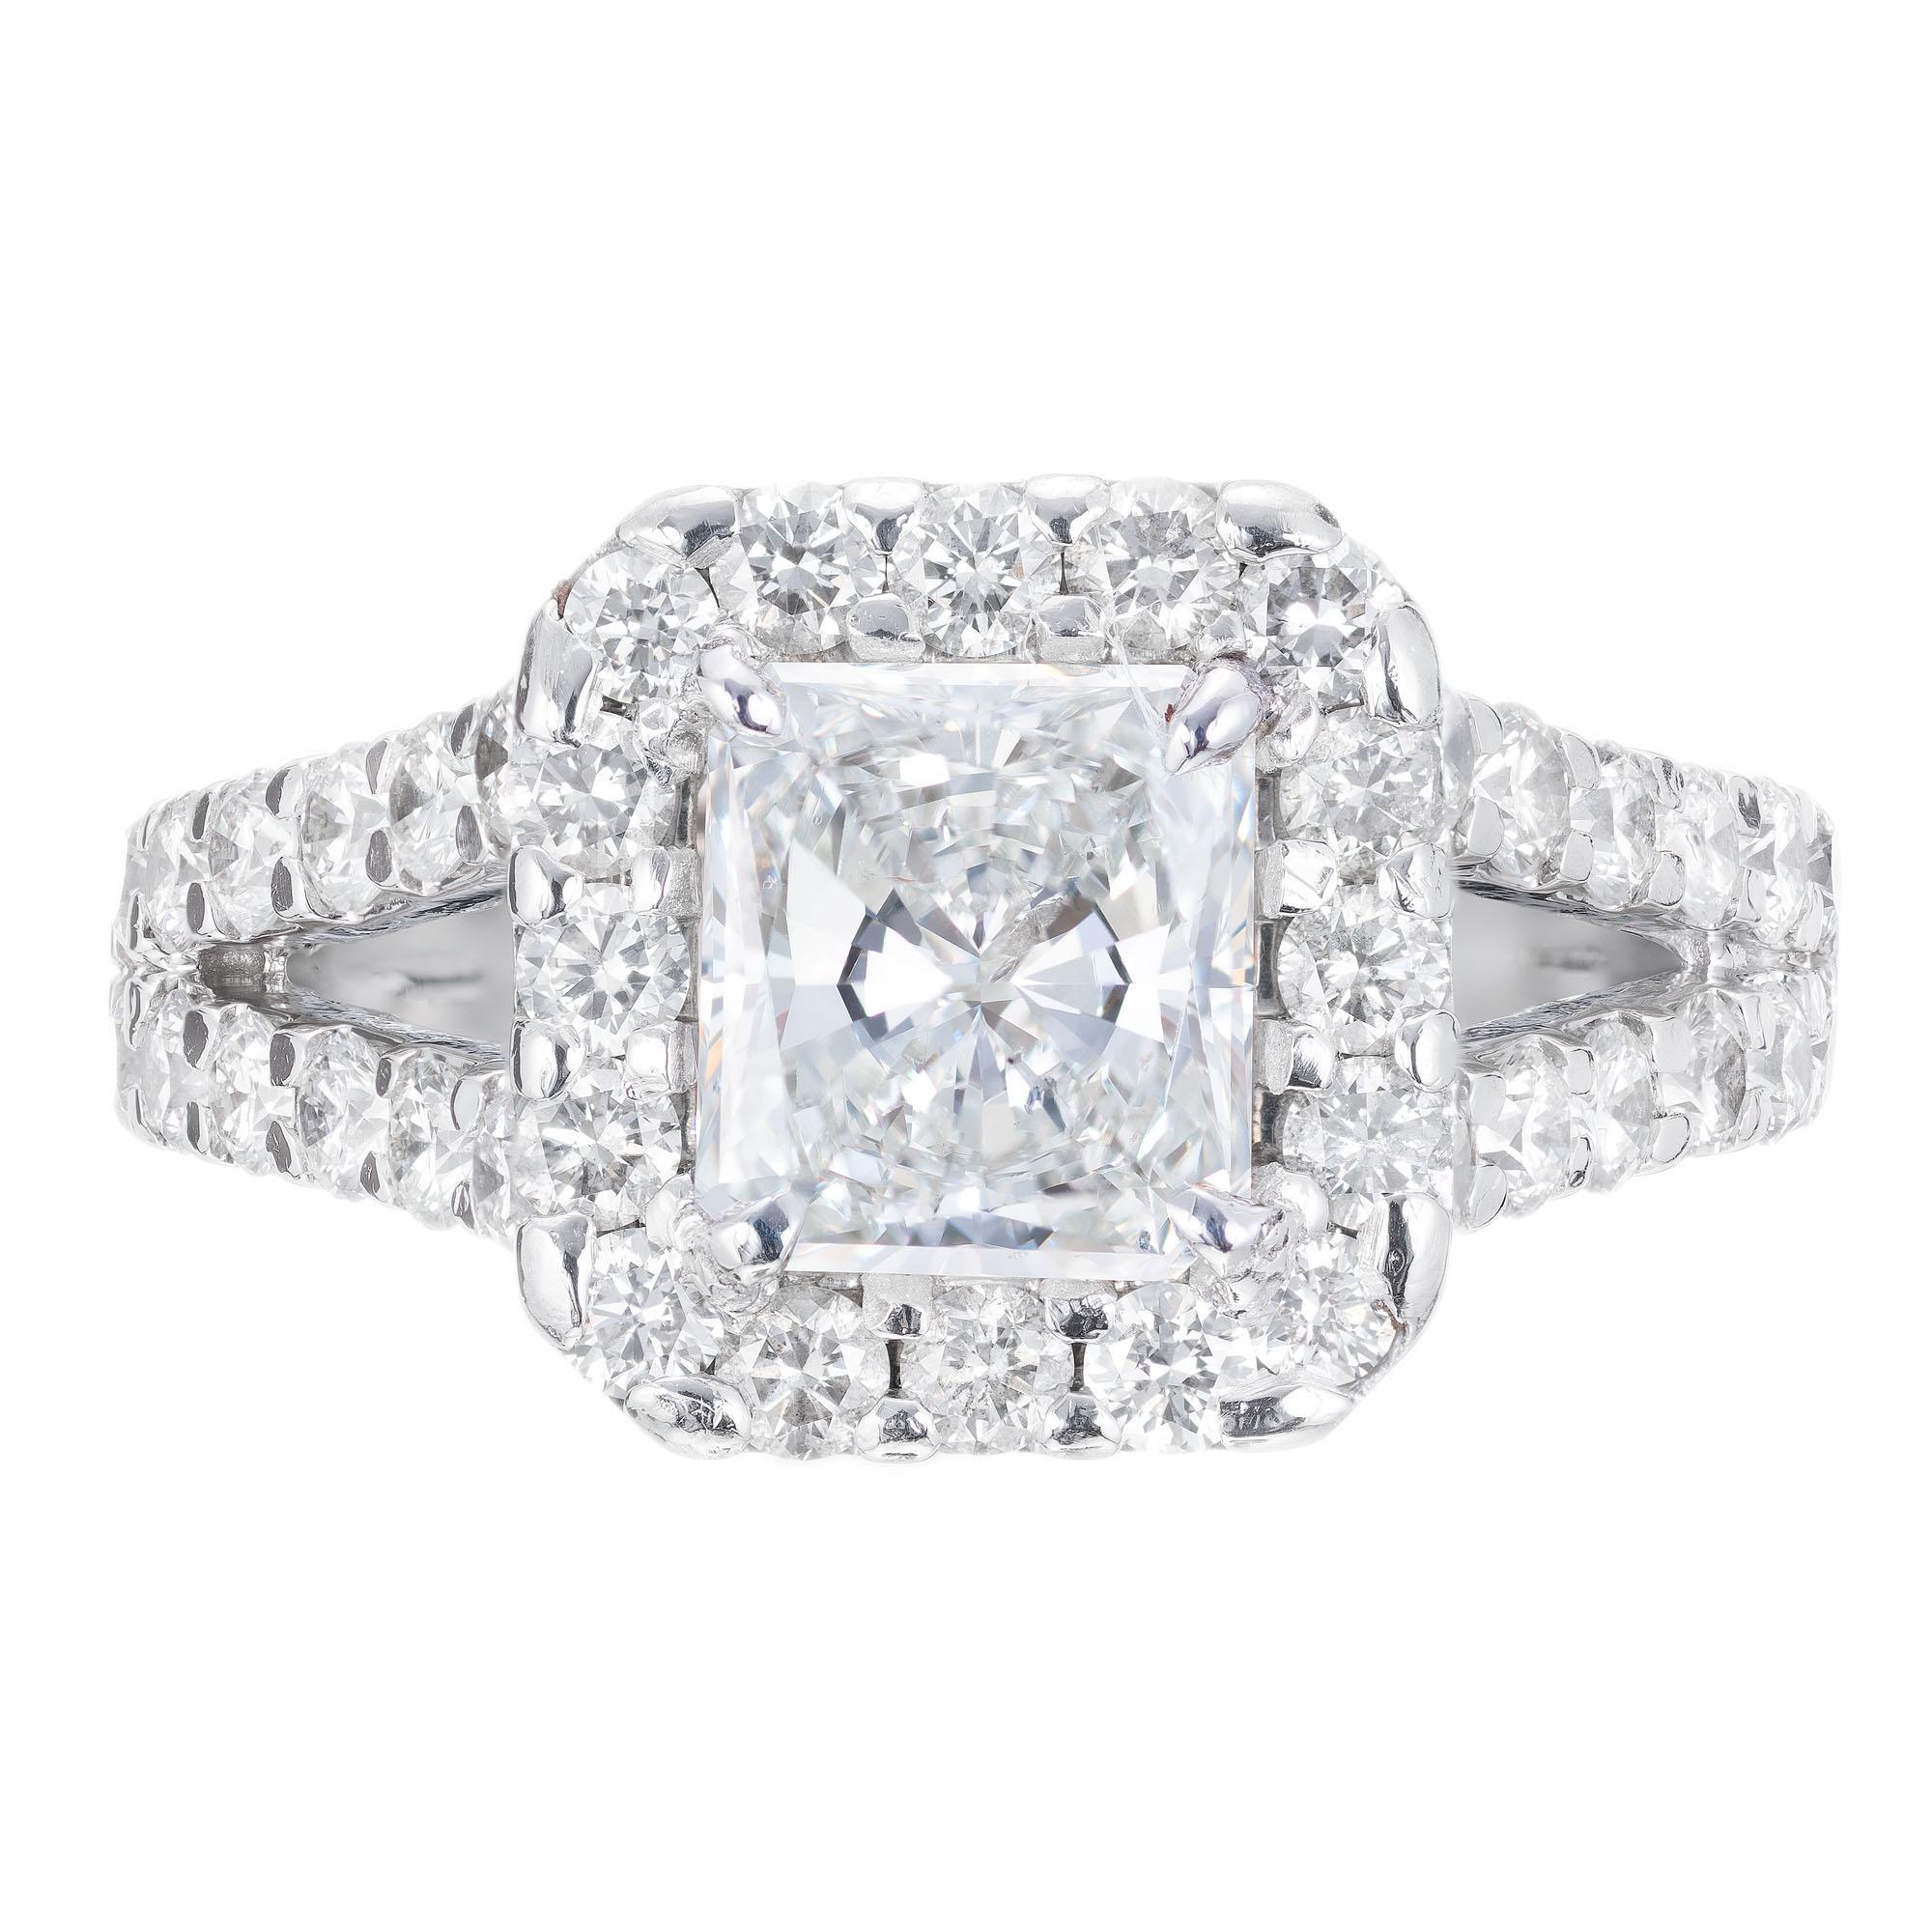 1.53 carat radiant cut diamond engagement ring. GIA certified center stone in a platinum diamond halo setting with 40 round brilliant cut accent diamonds. Created in the Peter Suchy Workshop.  

1 rectangular modified brilliant cut diamond F-G VS2,